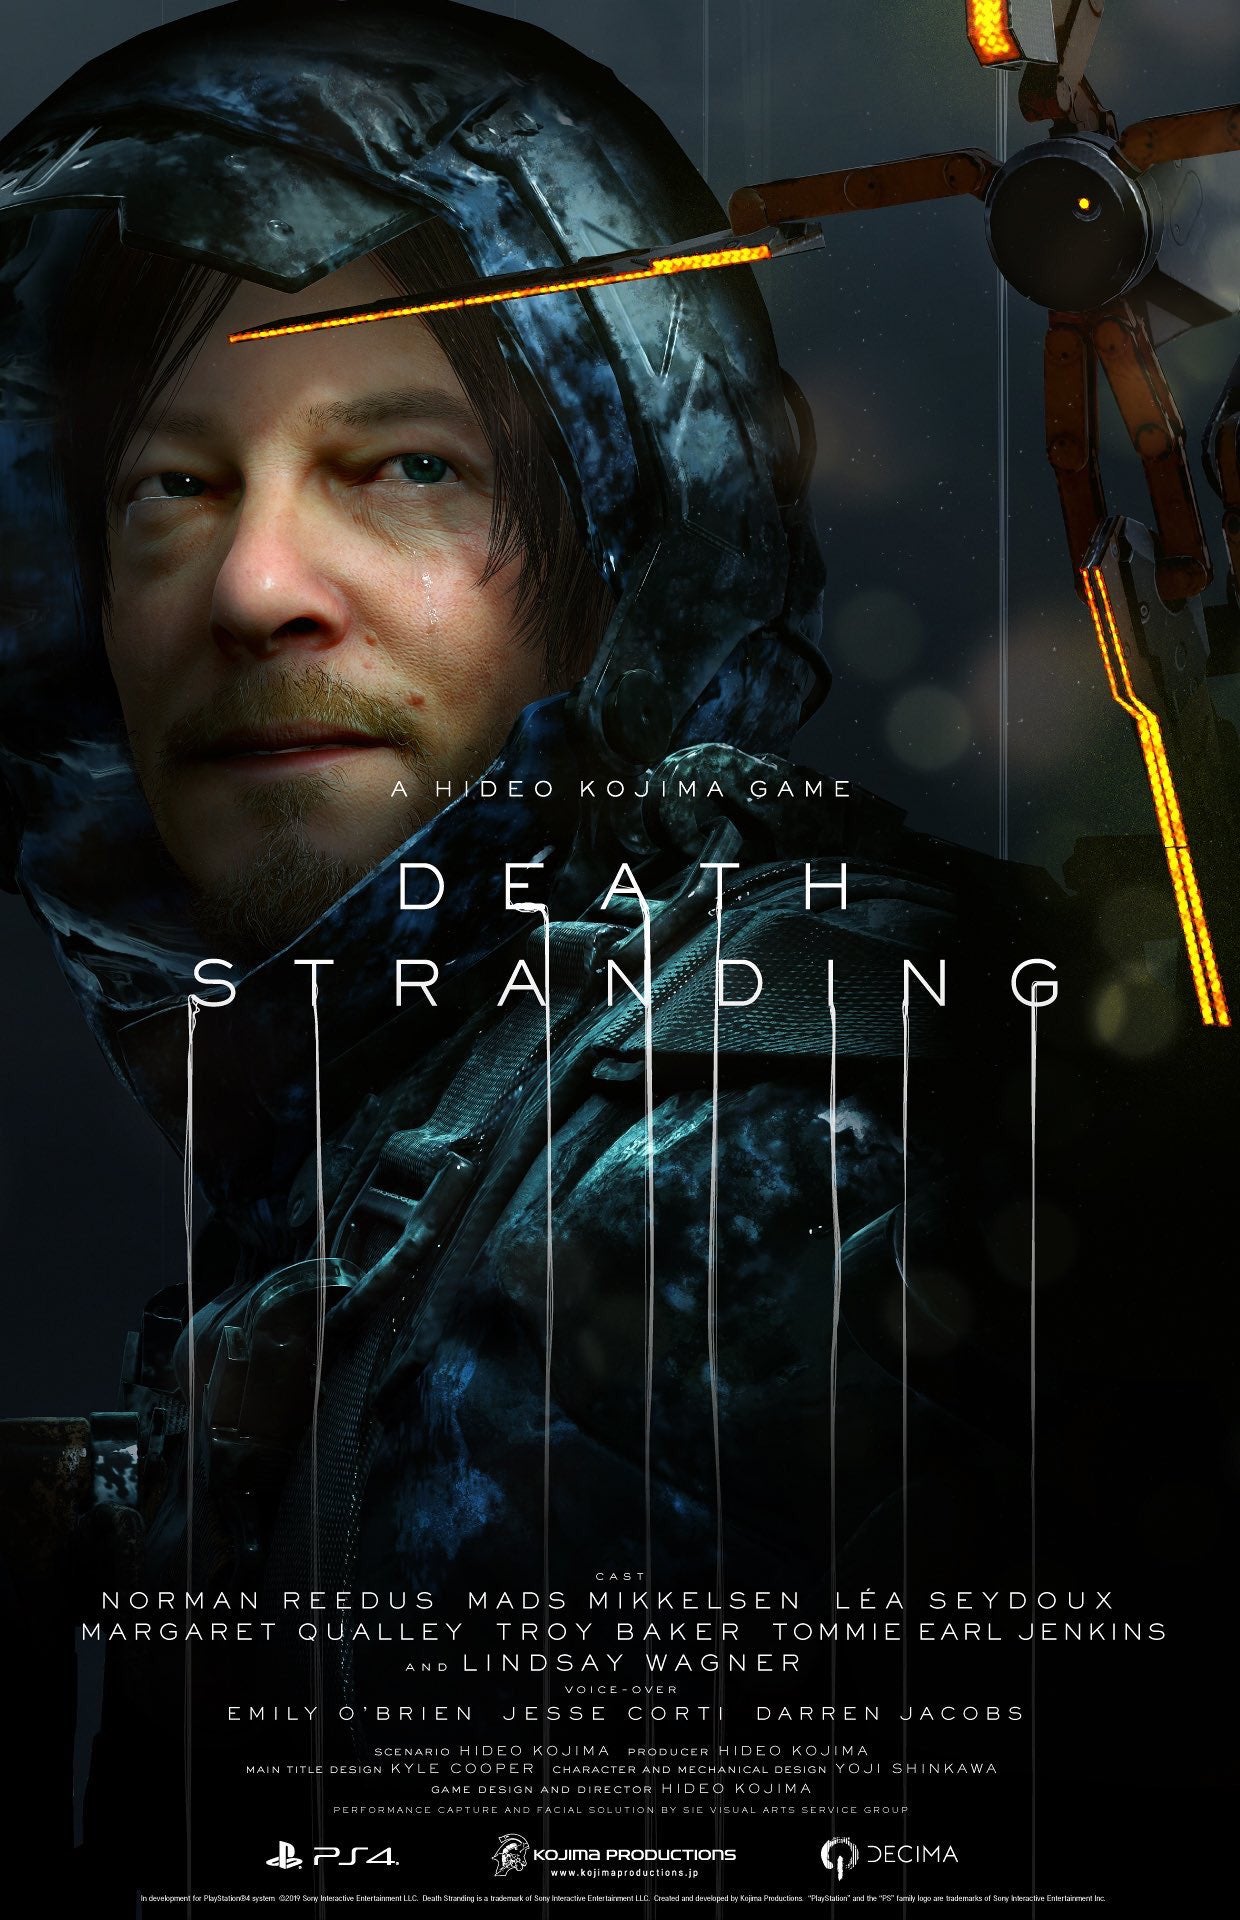 Image for A new look at Death Stranding to be shown during gamescom: Opening Night Live